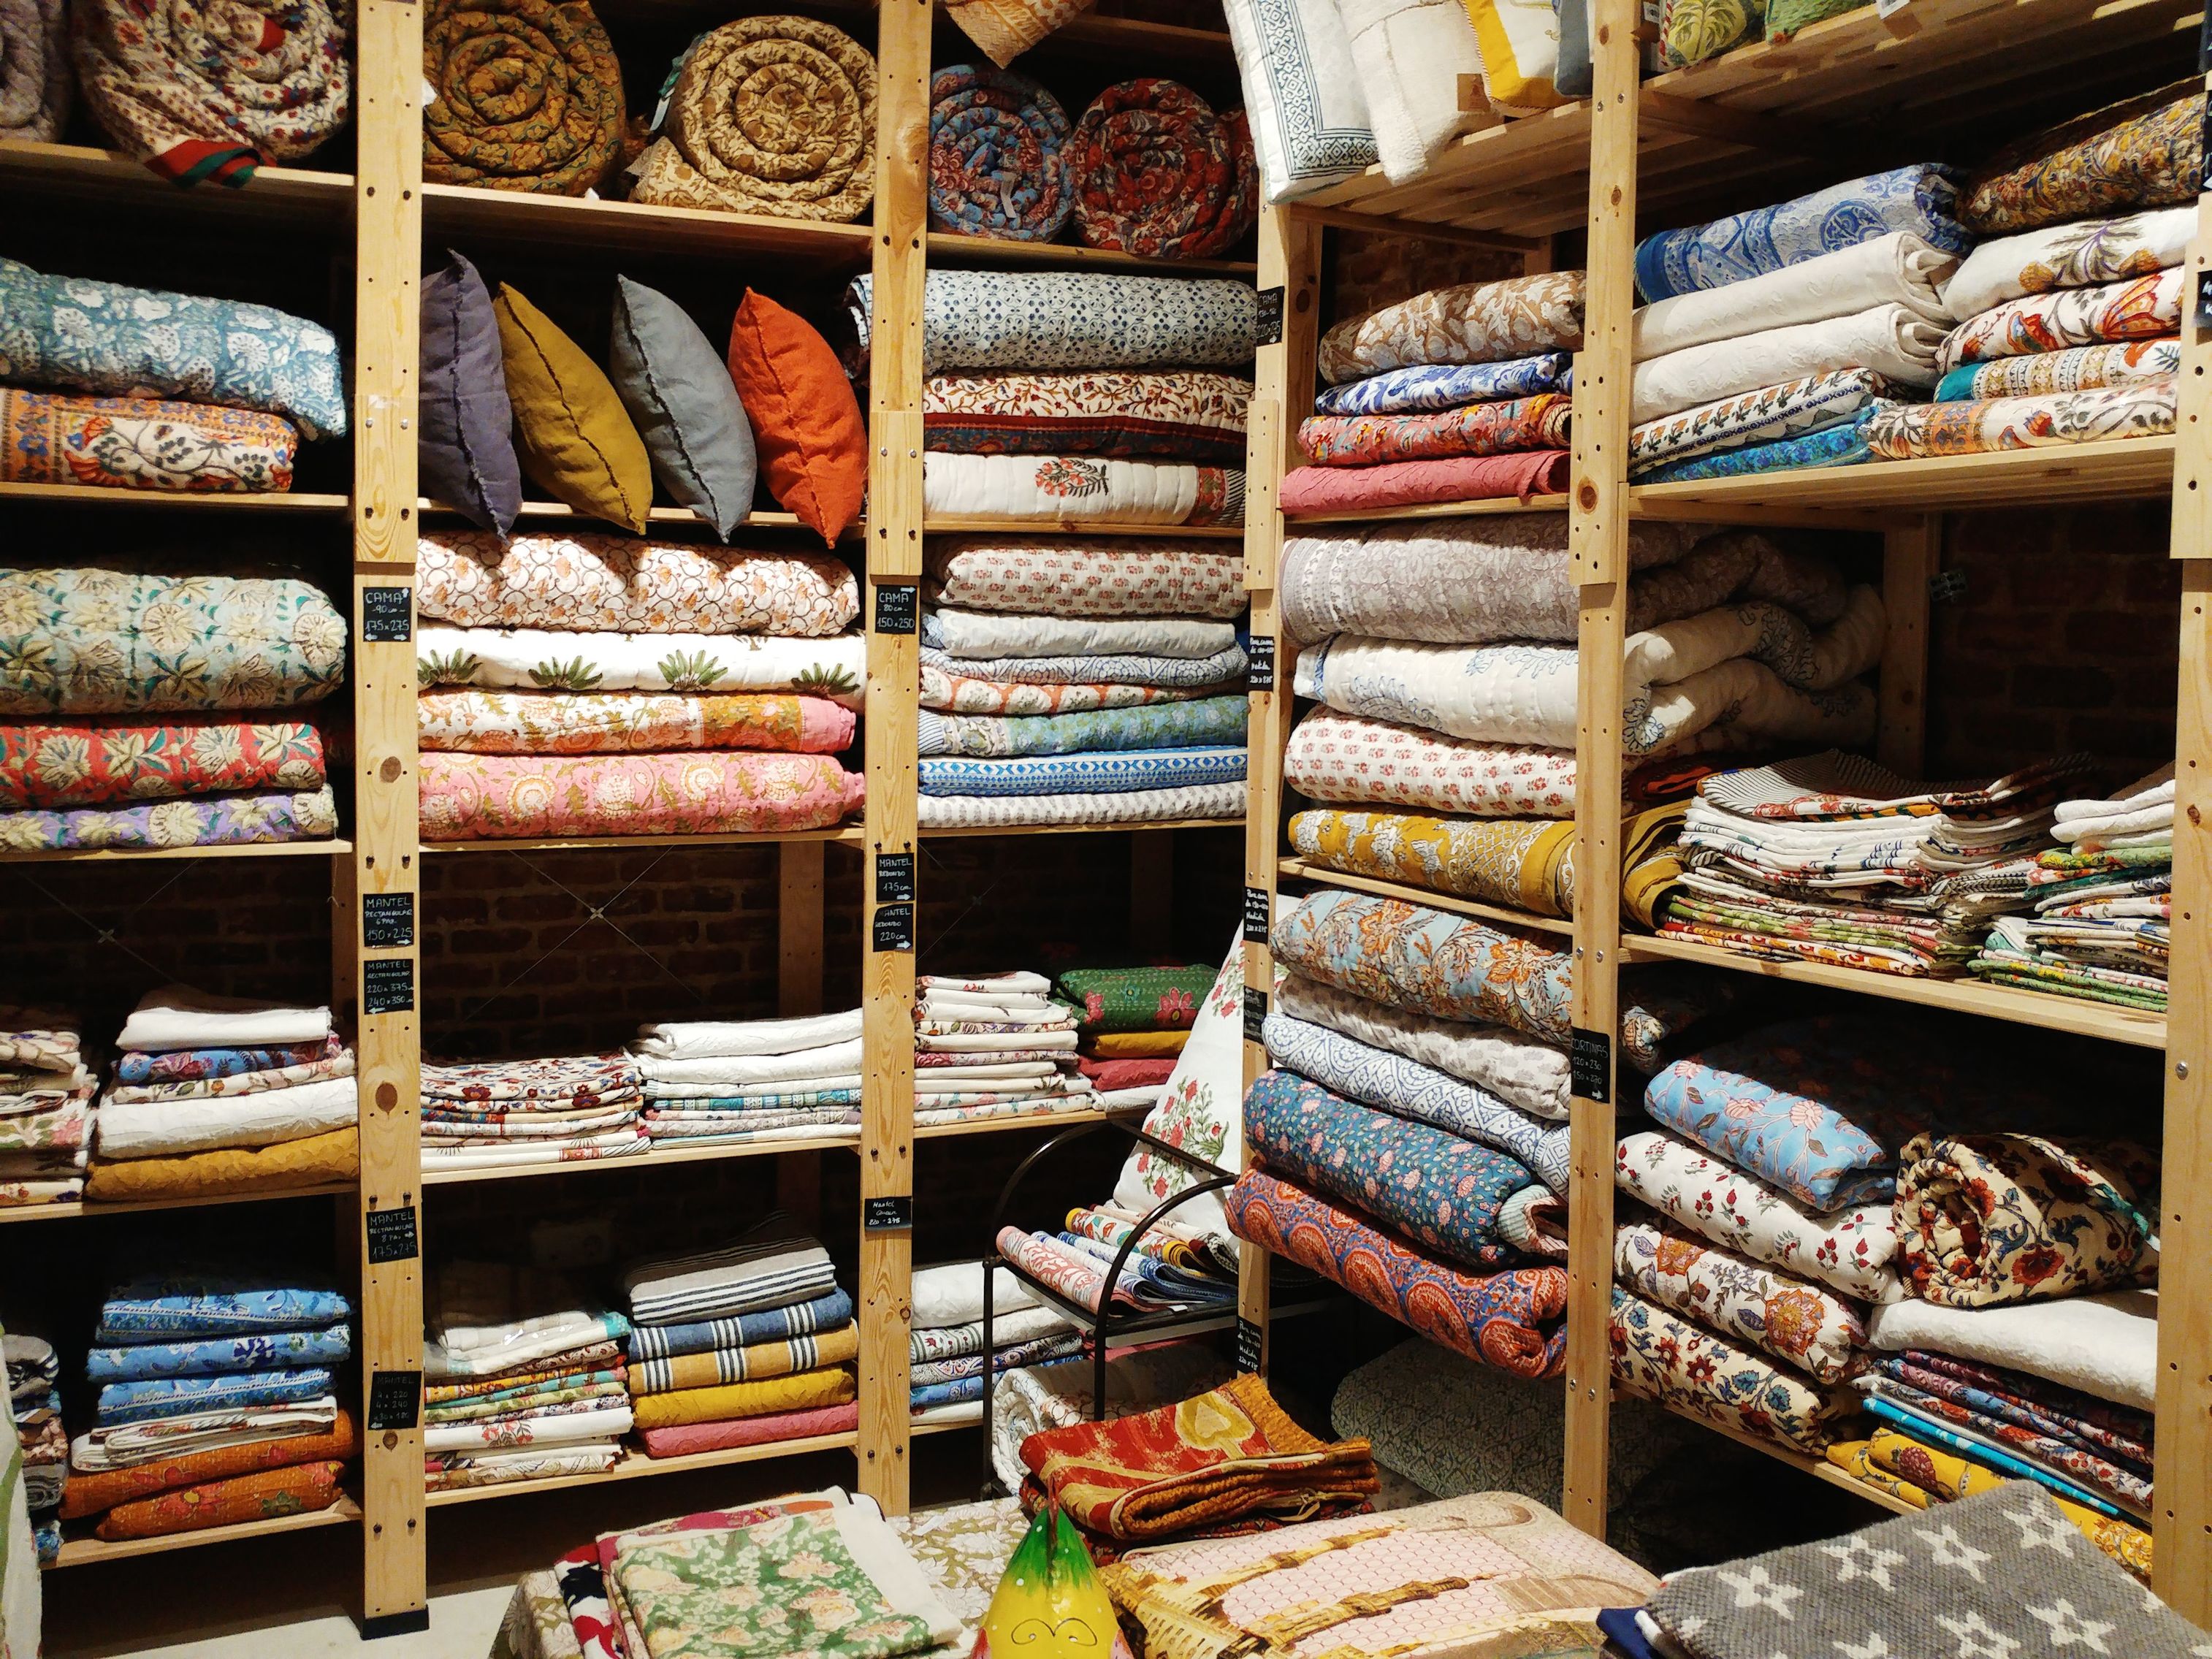 Indian artisanal textiles in Aunty B shop in Madrid's Chueca